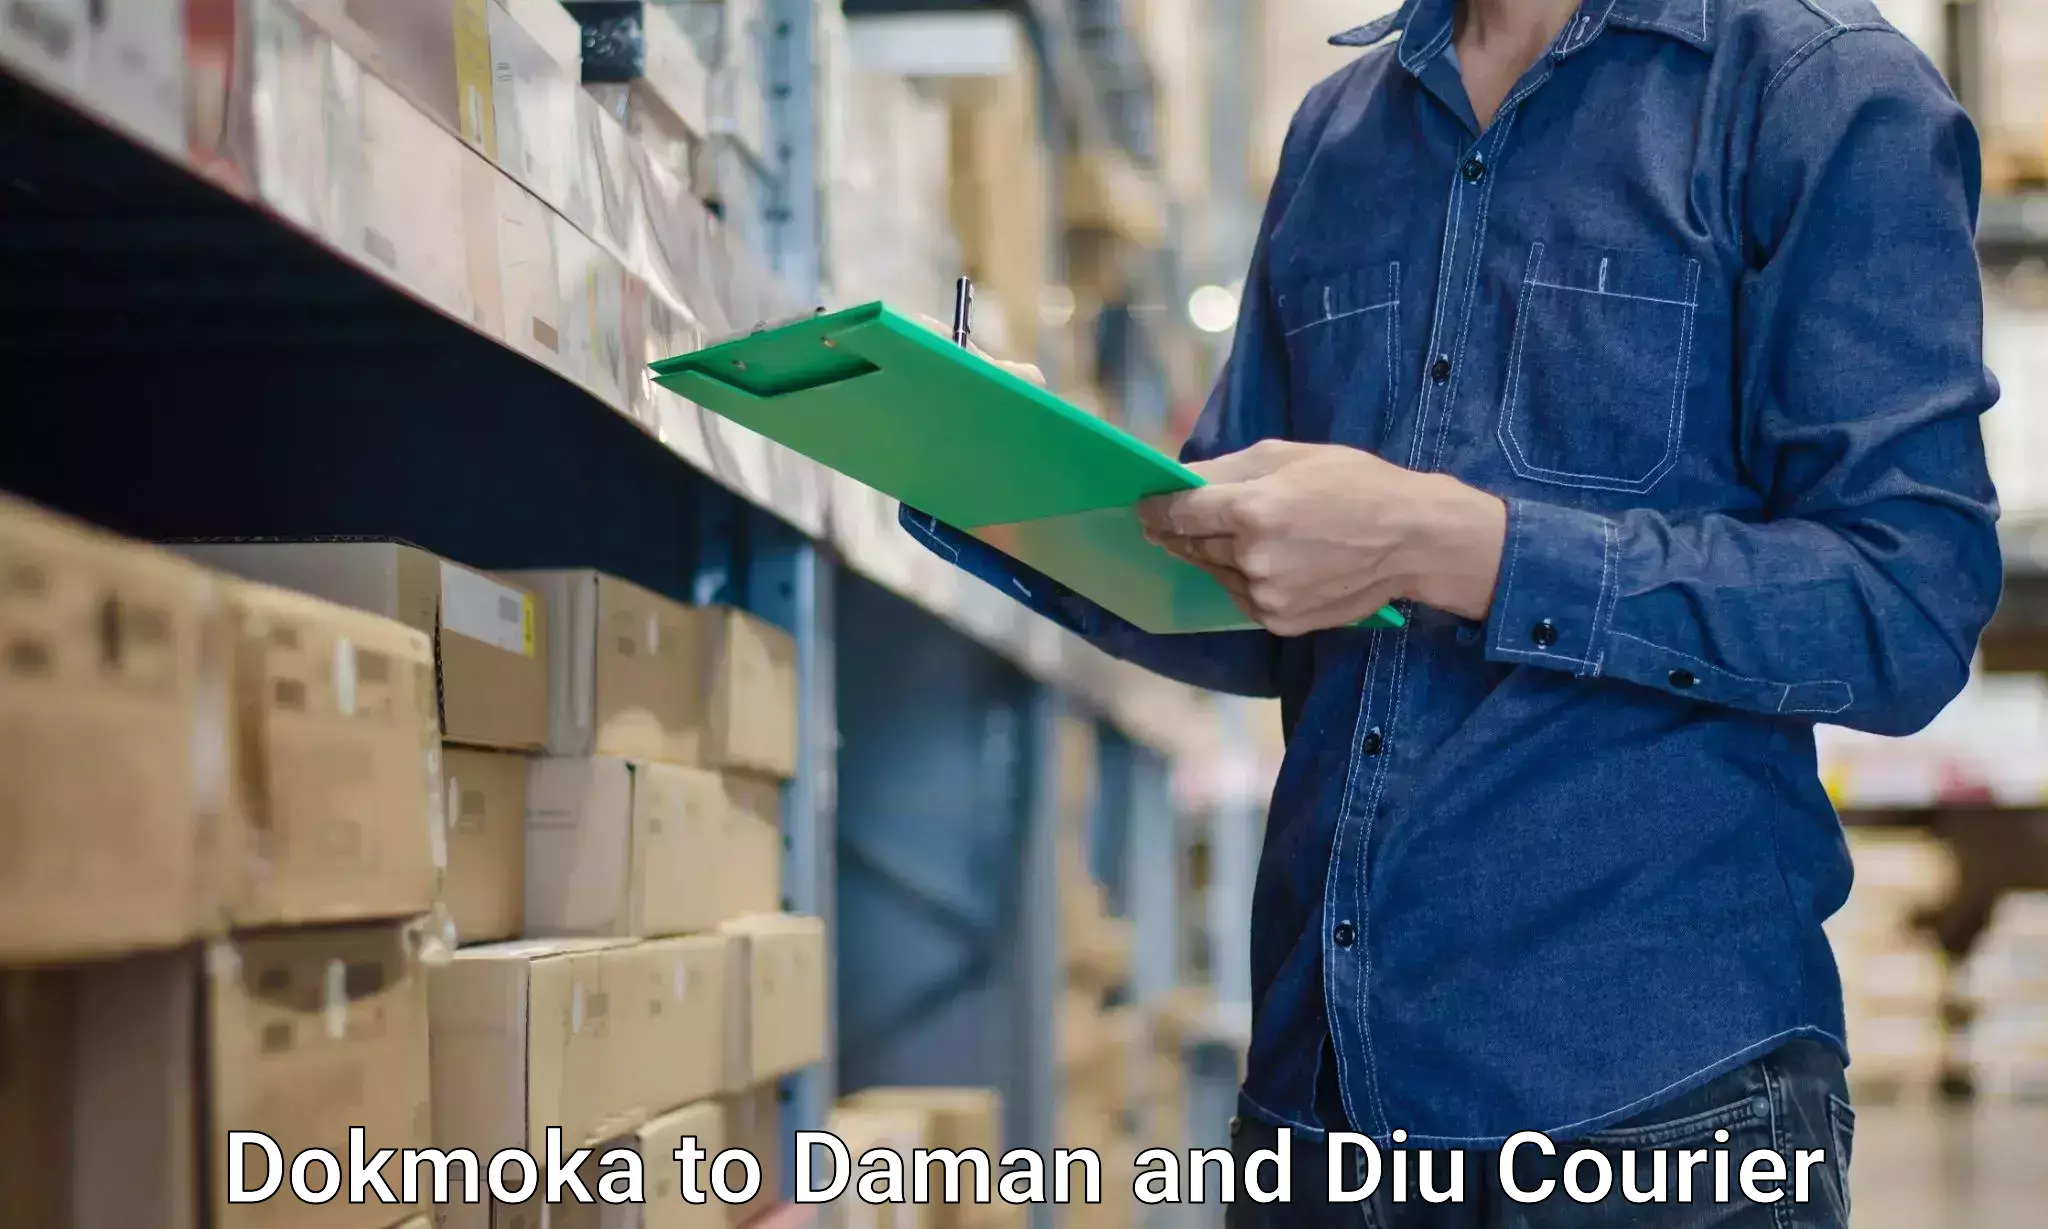 Comprehensive moving assistance in Dokmoka to Diu